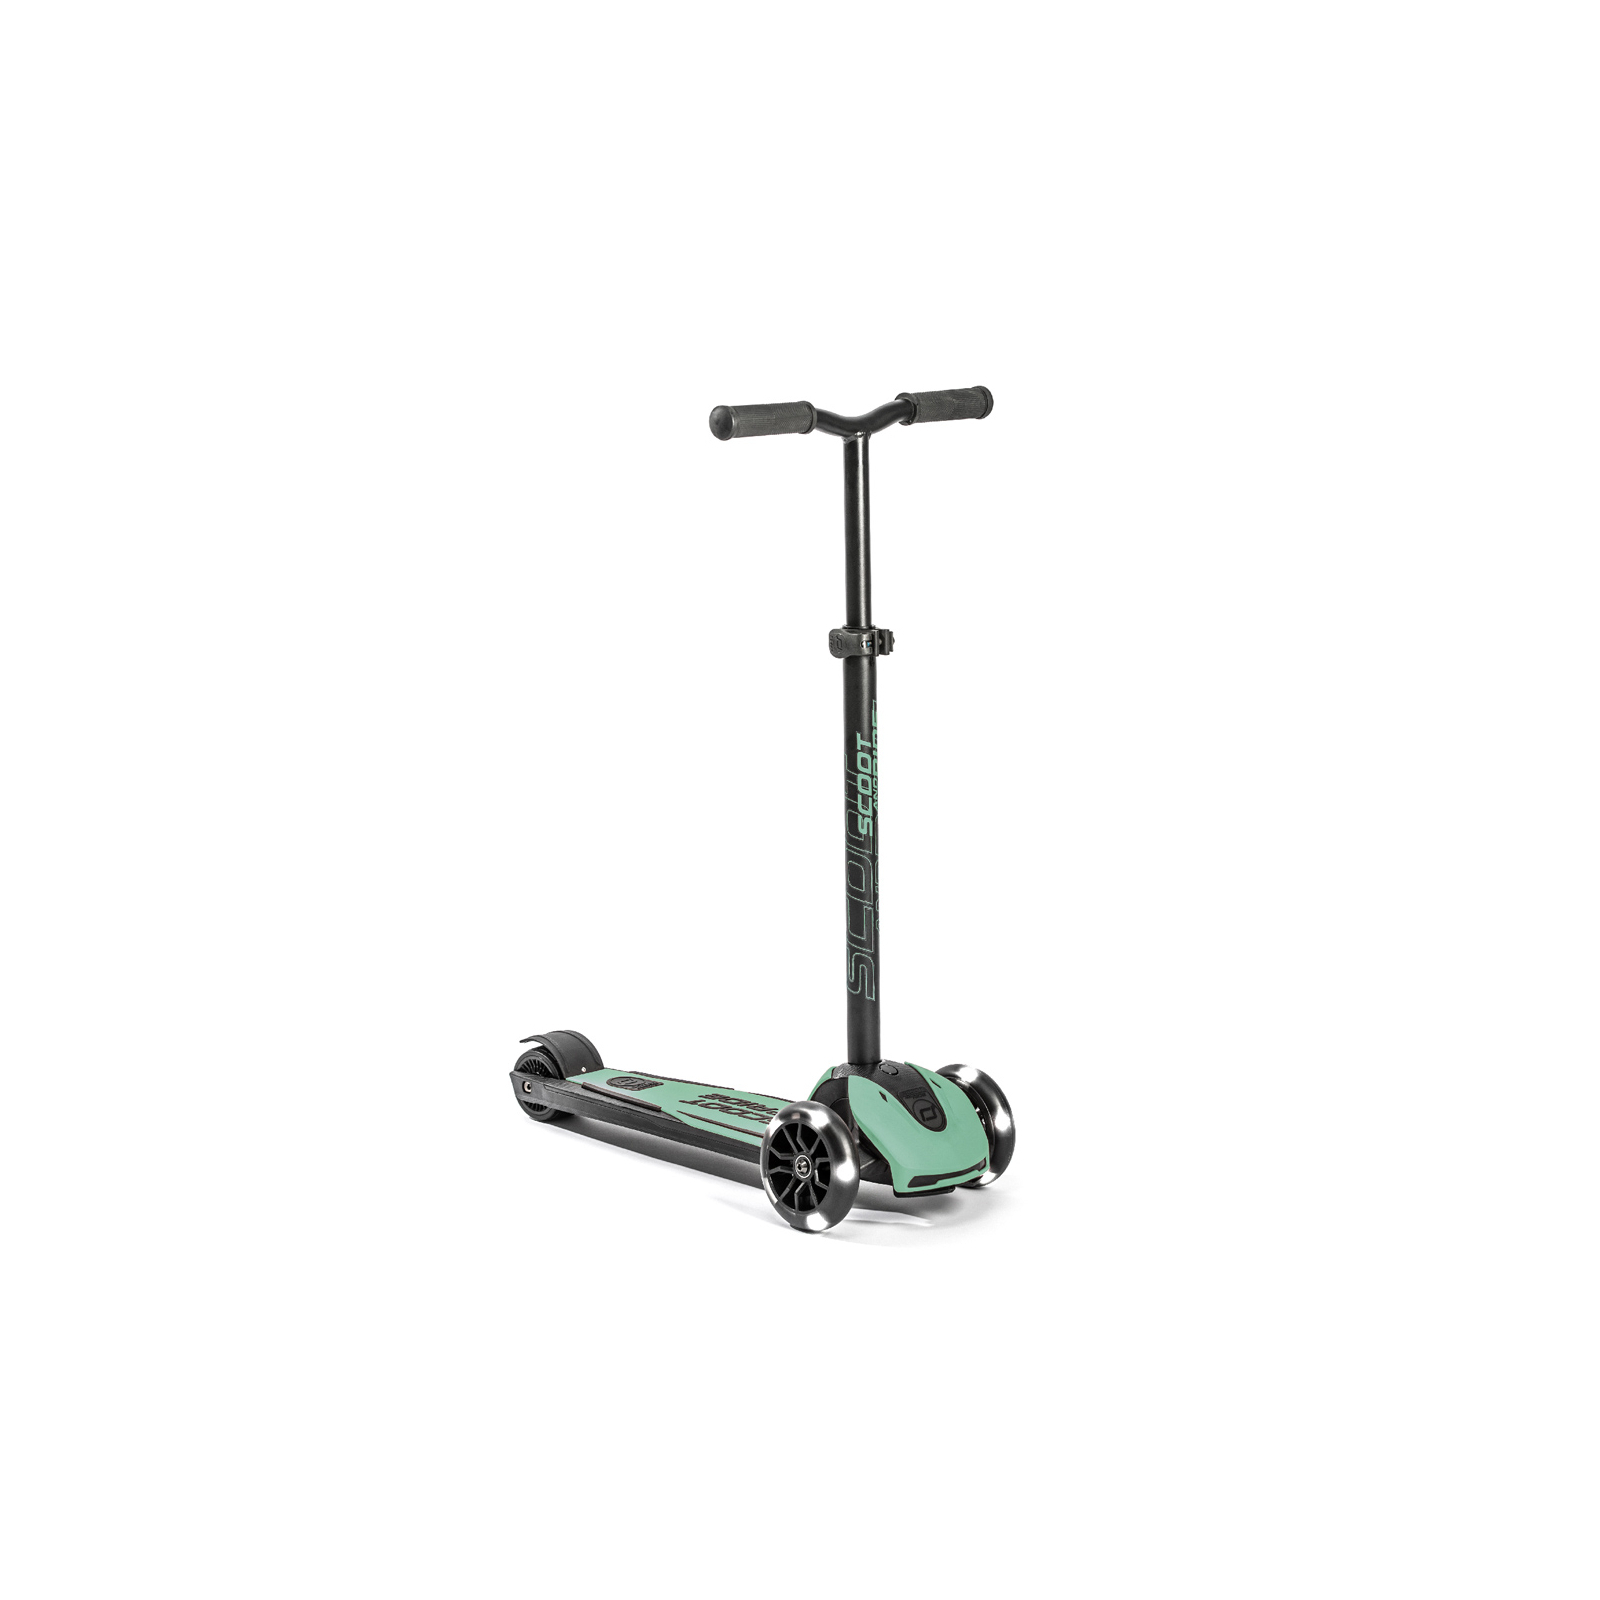 Самокат Scoot&Ride Highwaykick 5 LED Forest (SR-190117-FOREST)